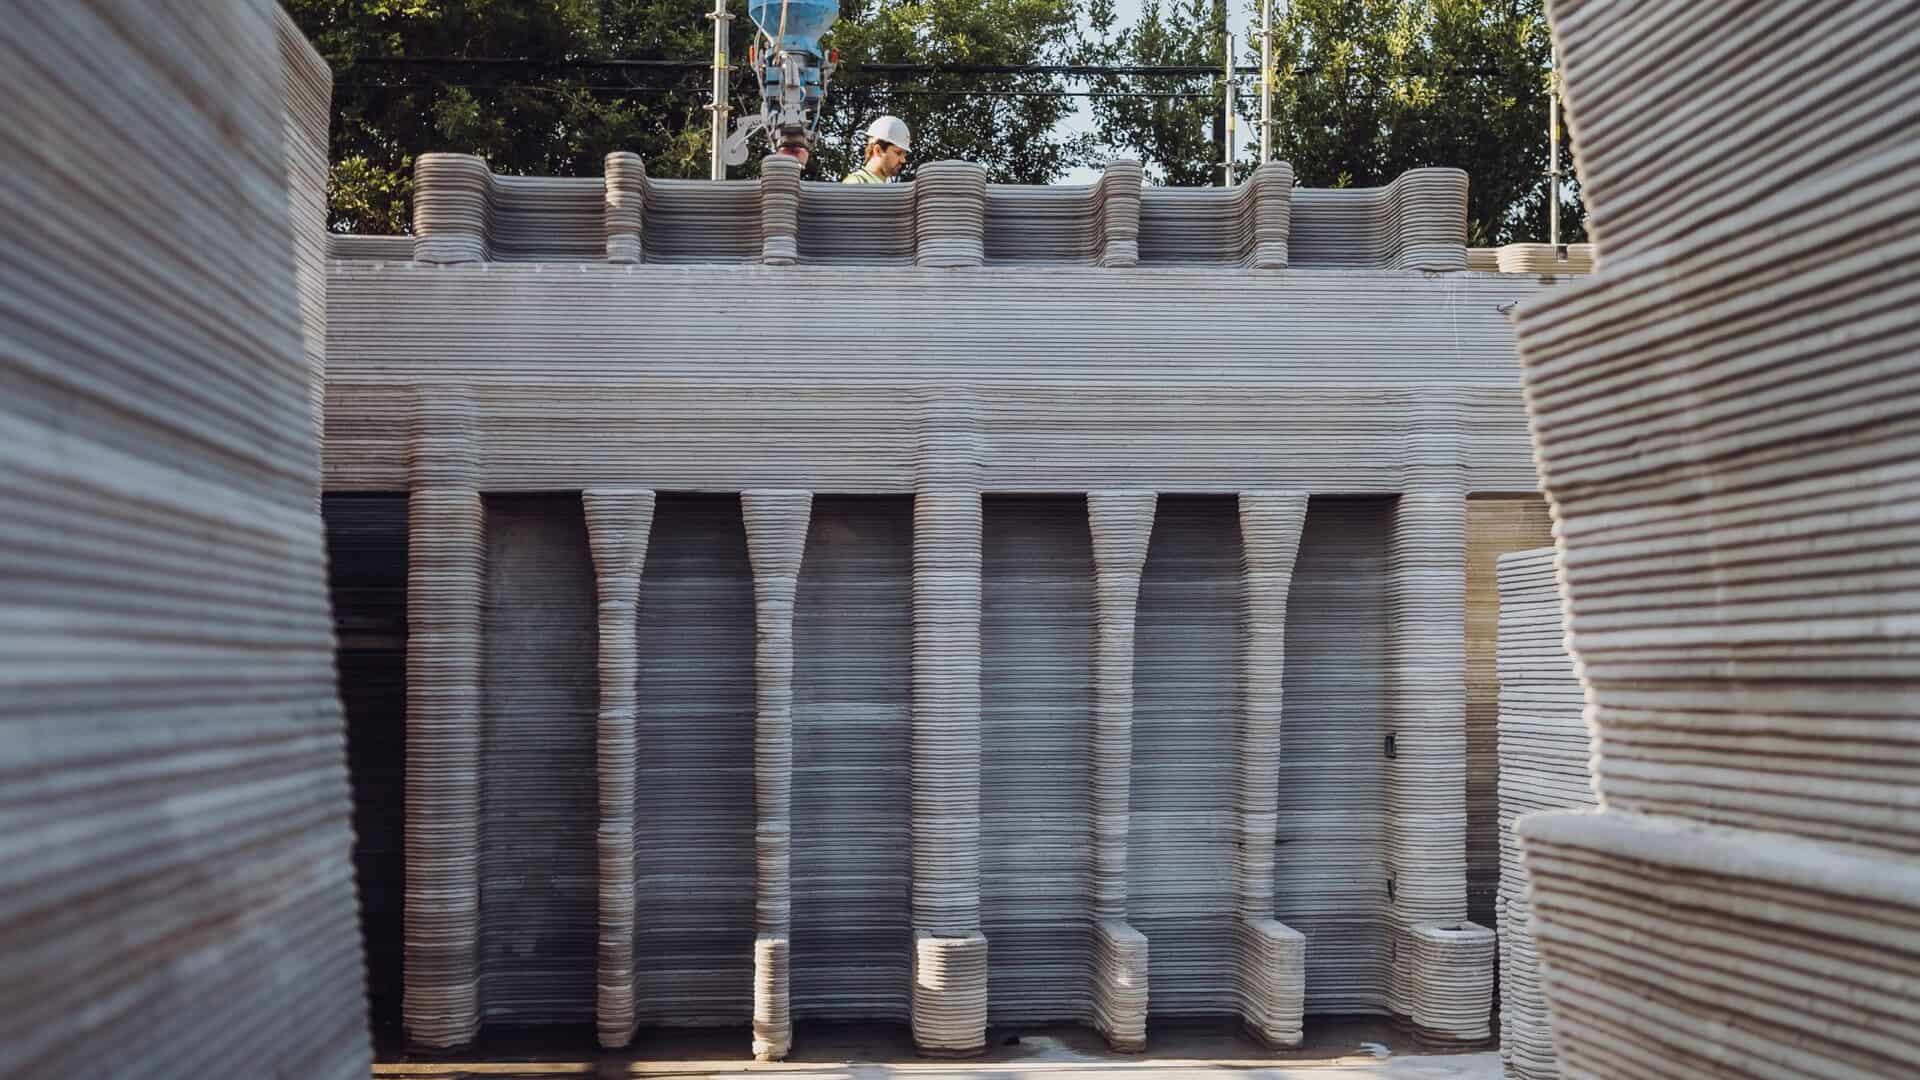 PERI Houston - the biggest 3D printed house in the world